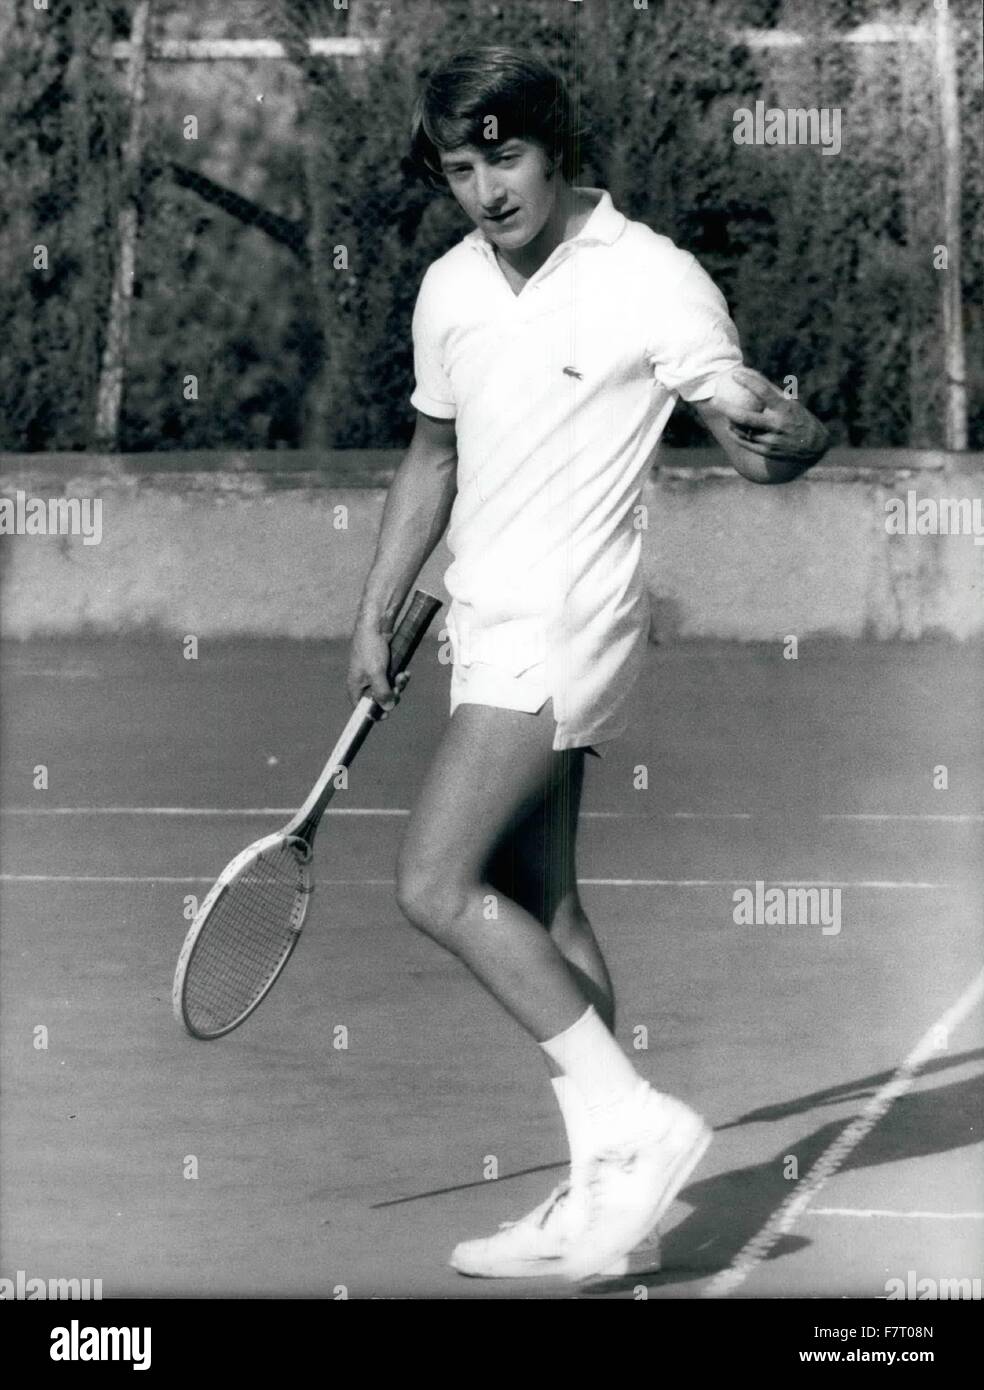 1971 - Septembre 1971. Dustin Hofman plays tennis. Dustin Hofman the famous actor spends these days in Rome waiting to play a film up to date directed by director Pietro Germi ''Finche Divo Non Ci Divida'' besides with star Carla Gravina e Stafania Sandrelli. Now is loving tennis a little for the passion and also to record the night last during the holidays early. Every morning takes lessons and casyto find him in a well backland and volee. © Keystone Pictures USA/ZUMAPRESS.com/Alamy Live News Stock Photo